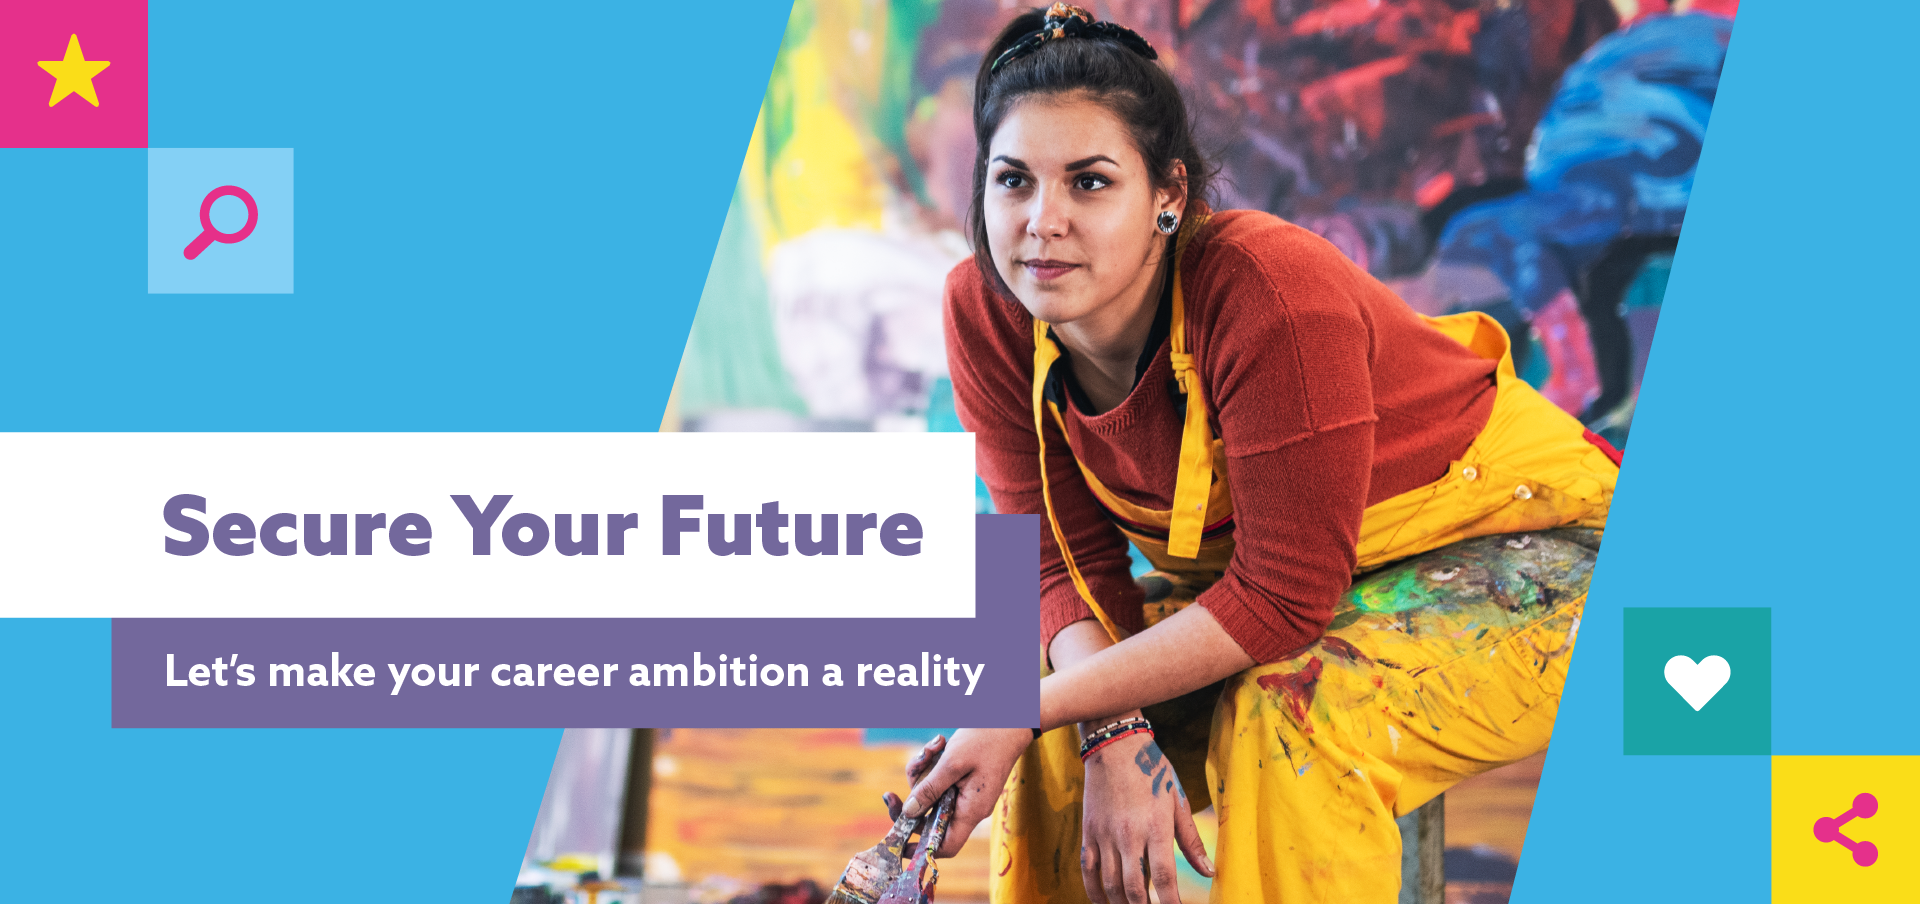 Person sitting with paintbrushes in art environment with the text Secure Your Future: Let's make your career ambition a reality